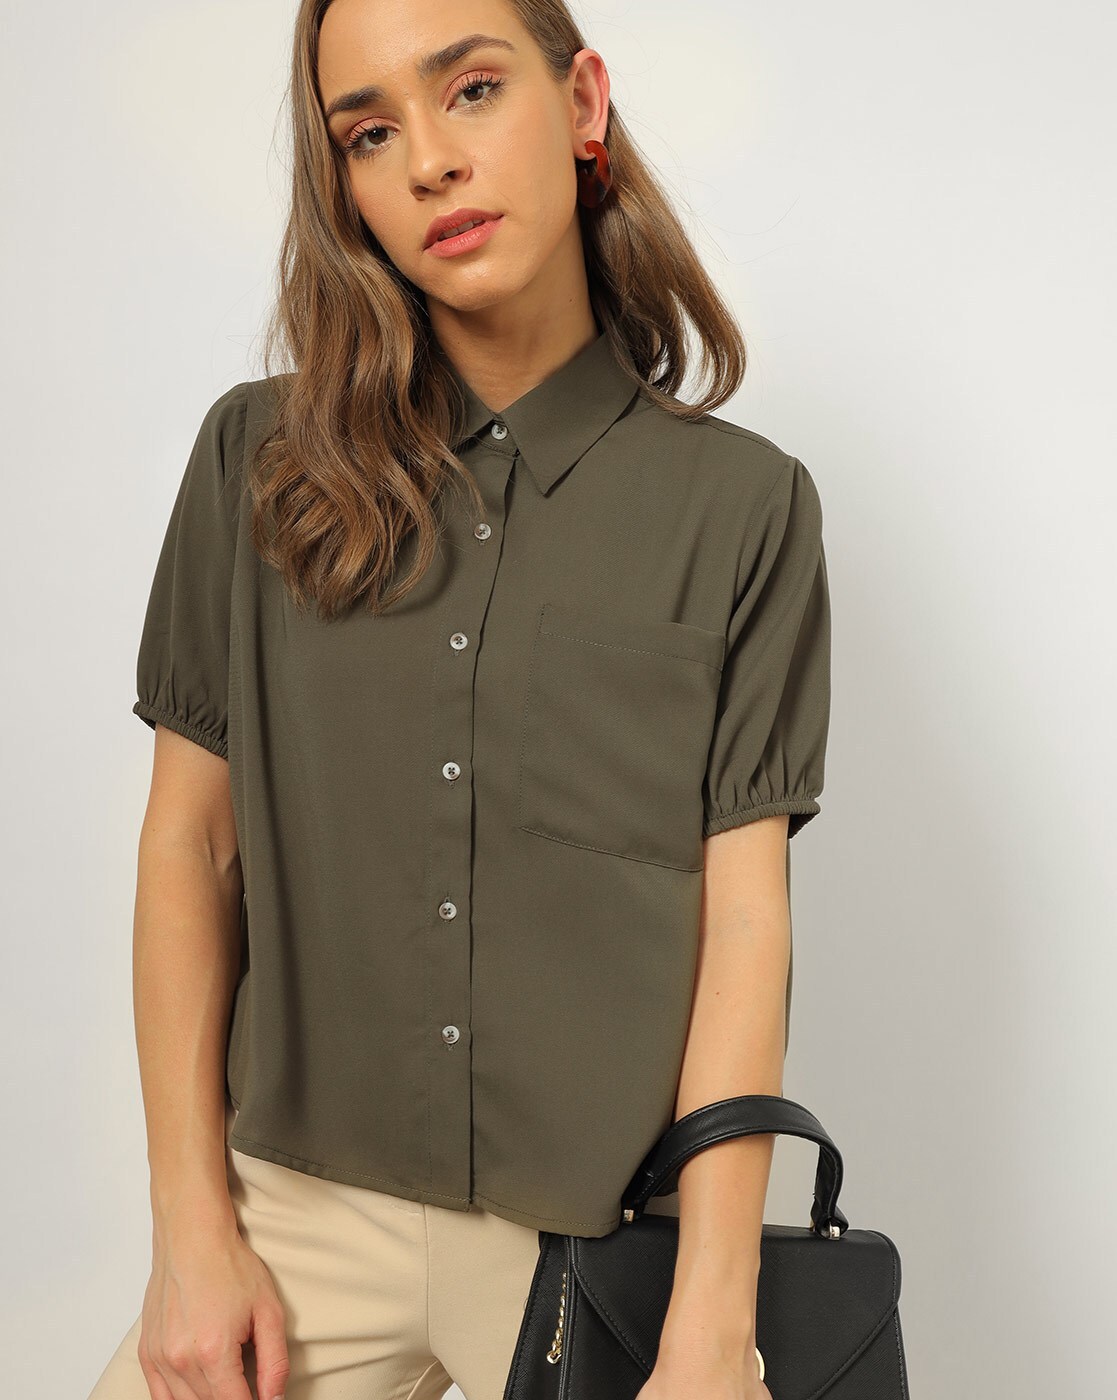 Olive Green Shirts for Women by Outryt ...